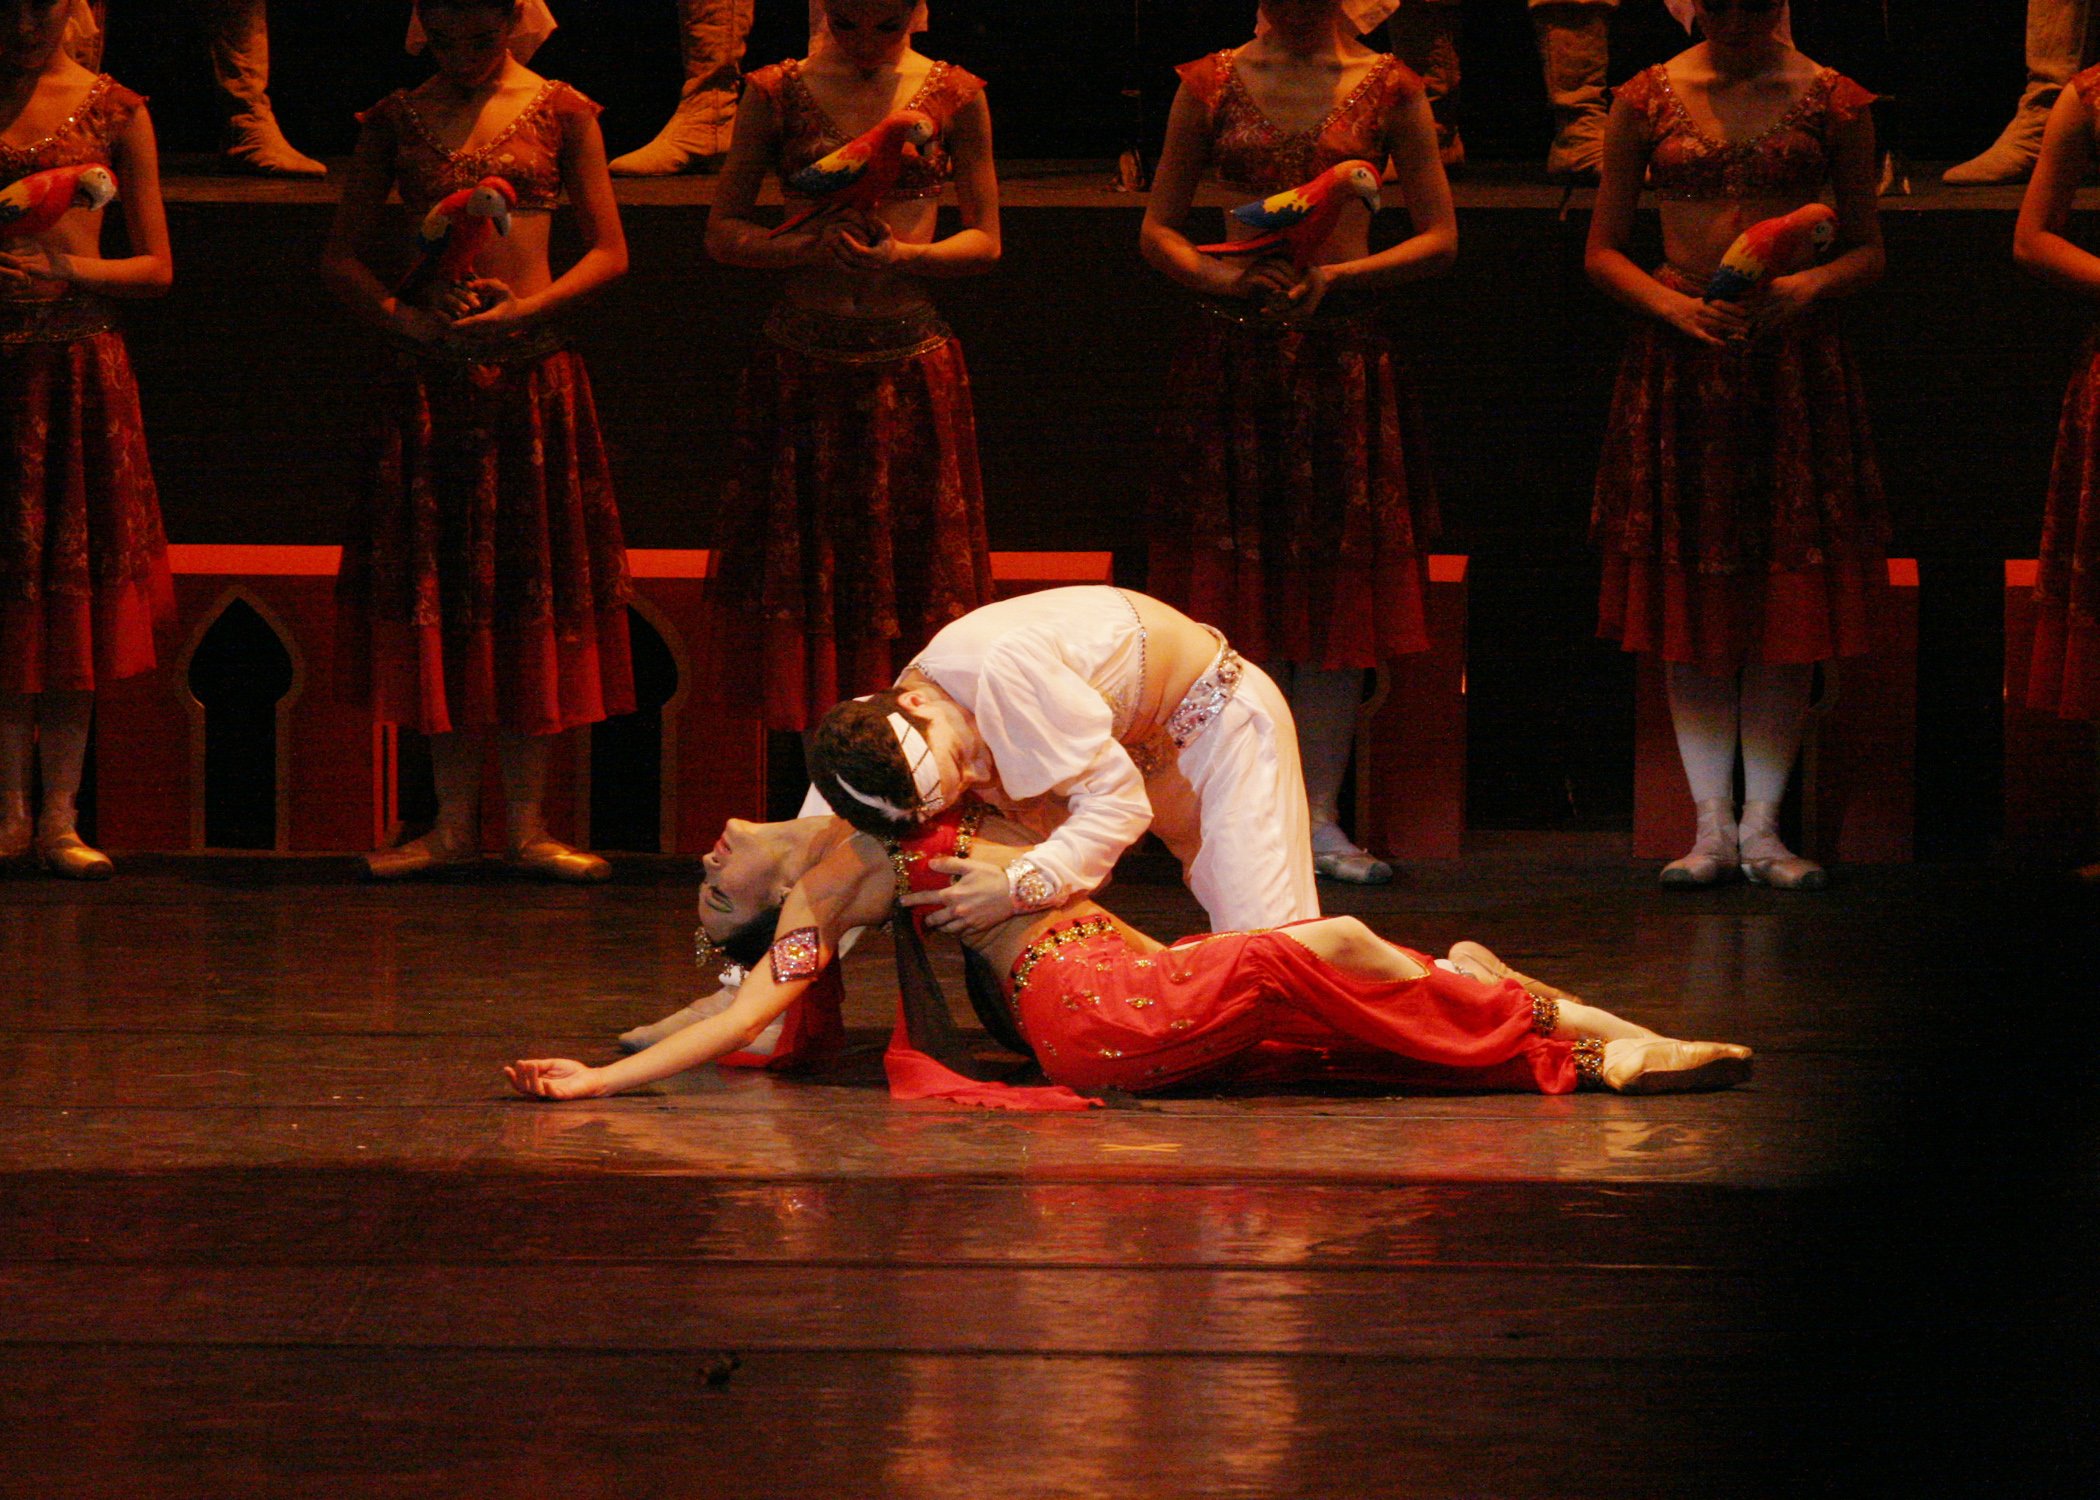    Solor (Maxim Chashchegorov) swears eternal love to the temple dancer Nikiya (Lisa Macuja-Elizalde) before the sacred flame in  La Bayadere  (2004). But unknown to her, he is already committed to Gamzatti. Upon learning of Nikiya, Gamzatti plots wi